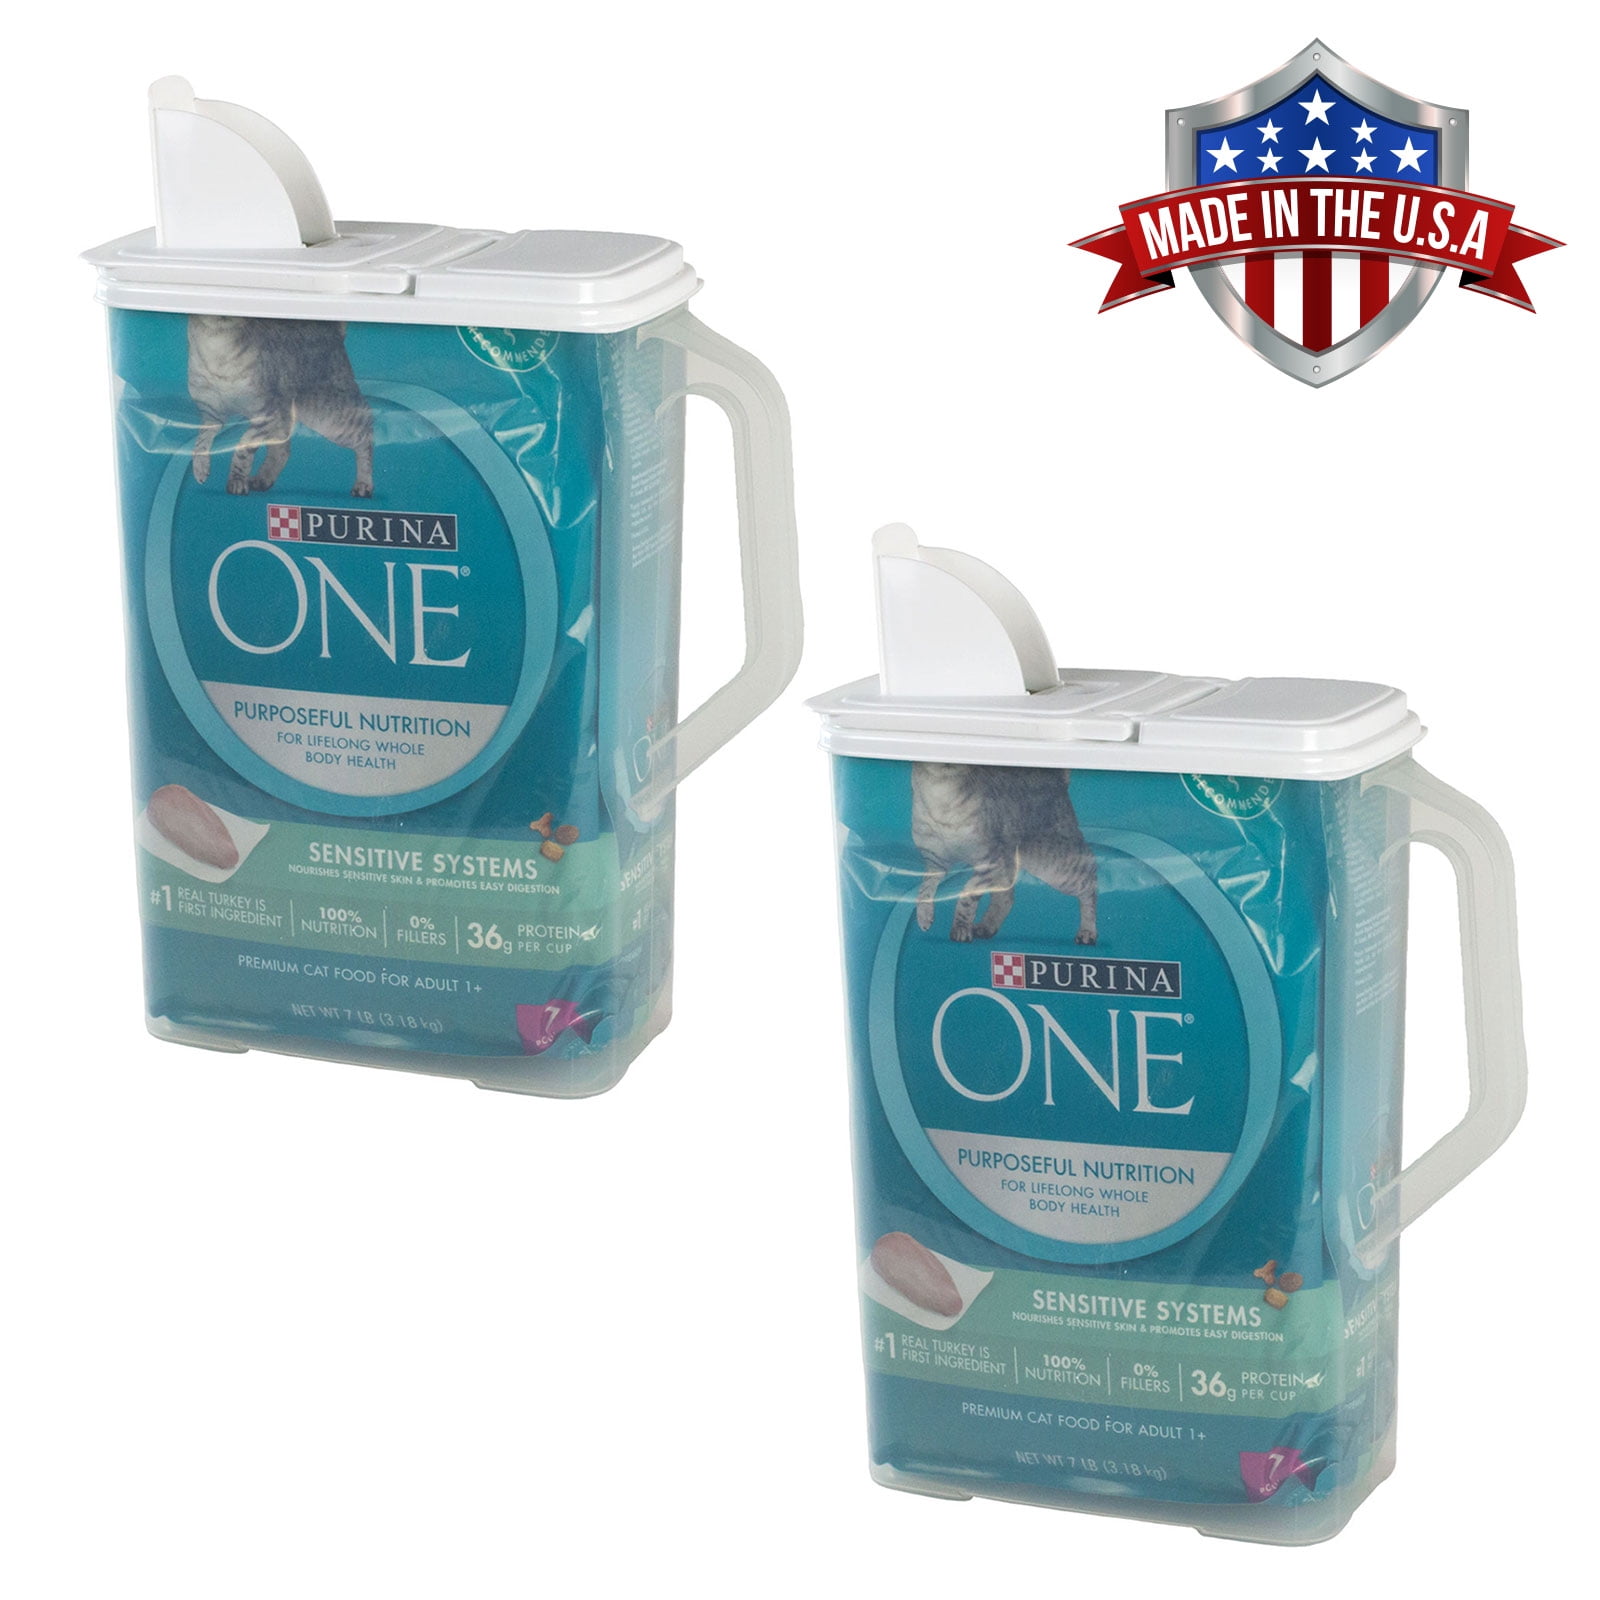 Buddeez Sugar Keeper & More Flip-up Pour SPOUT 2-Pack with Exclusive Clear Containers Set of 3 Sold by Everyday_low_prices